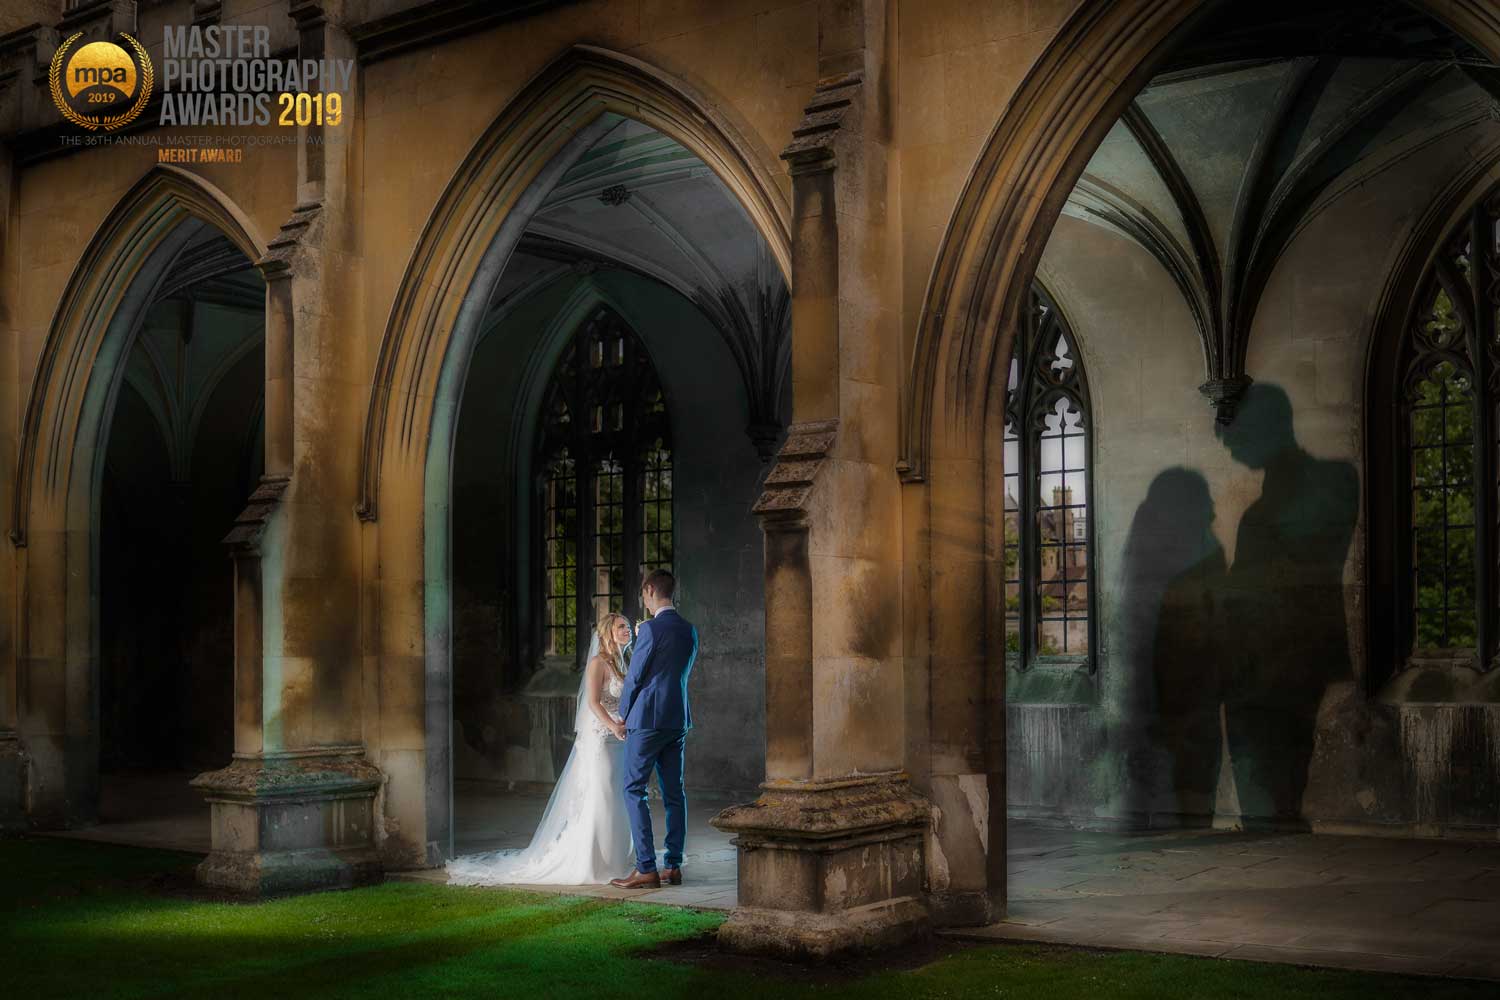 Newly married couple casting their shadow on the wall at St Johns College, Cambridge